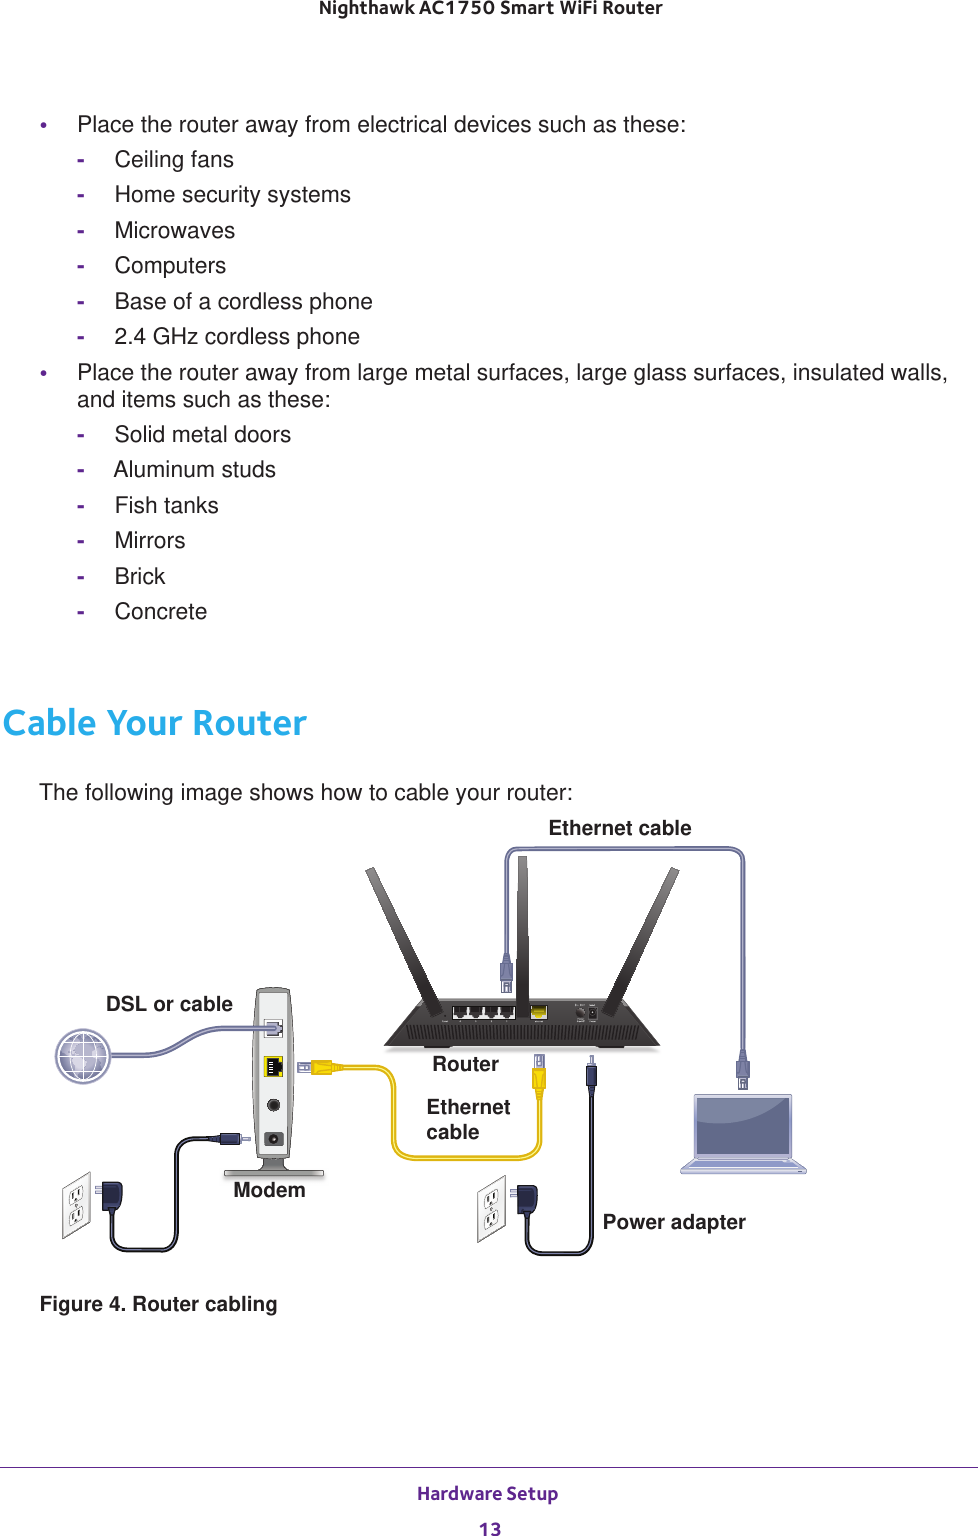 Hardware Setup 13 Nighthawk AC1750 Smart WiFi Router•Place the router away from electrical devices such as these:-Ceiling fans-Home security systems-Microwaves-Computers-Base of a cordless phone-2.4 GHz cordless phone•Place the router away from large metal surfaces, large glass surfaces, insulated walls, and items such as these:-Solid metal doors-Aluminum studs-Fish tanks-Mirrors-Brick-ConcreteCable Your RouterThe following image shows how to cable your router:Ethernet cableRouterModemEthernet cableDSL or cablePower adapterFigure 4. Router cabling